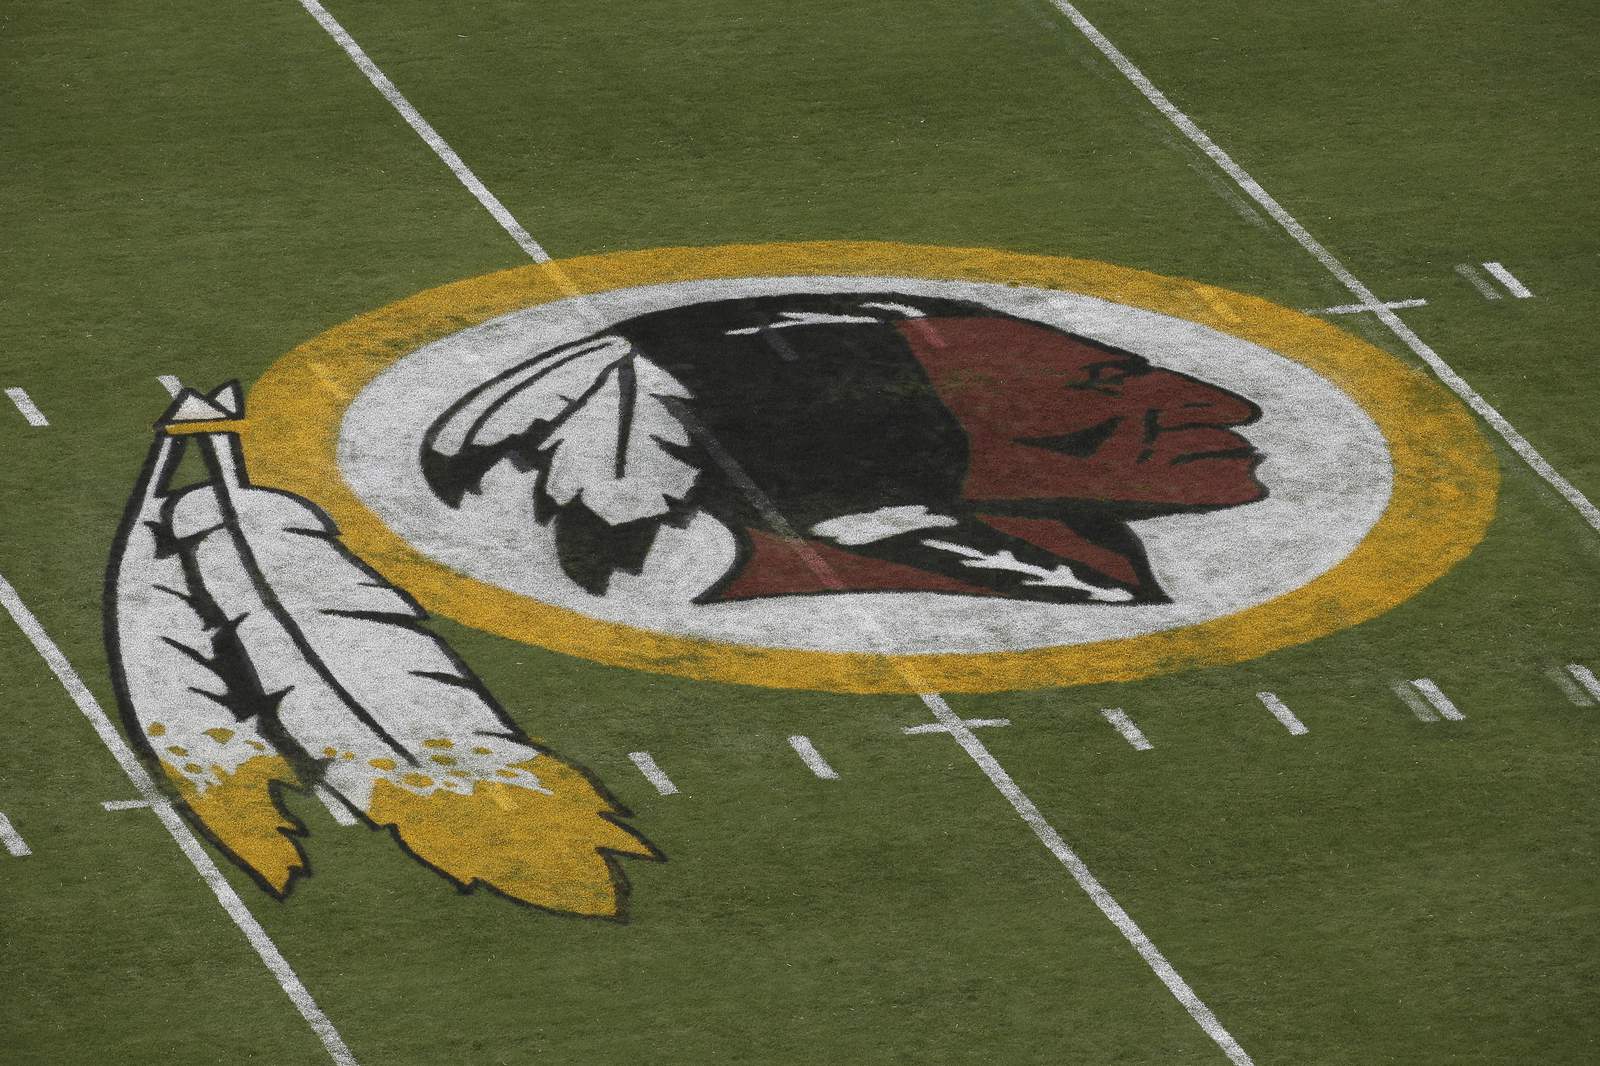 Washington NFL team dropping Redskins name after 87 years